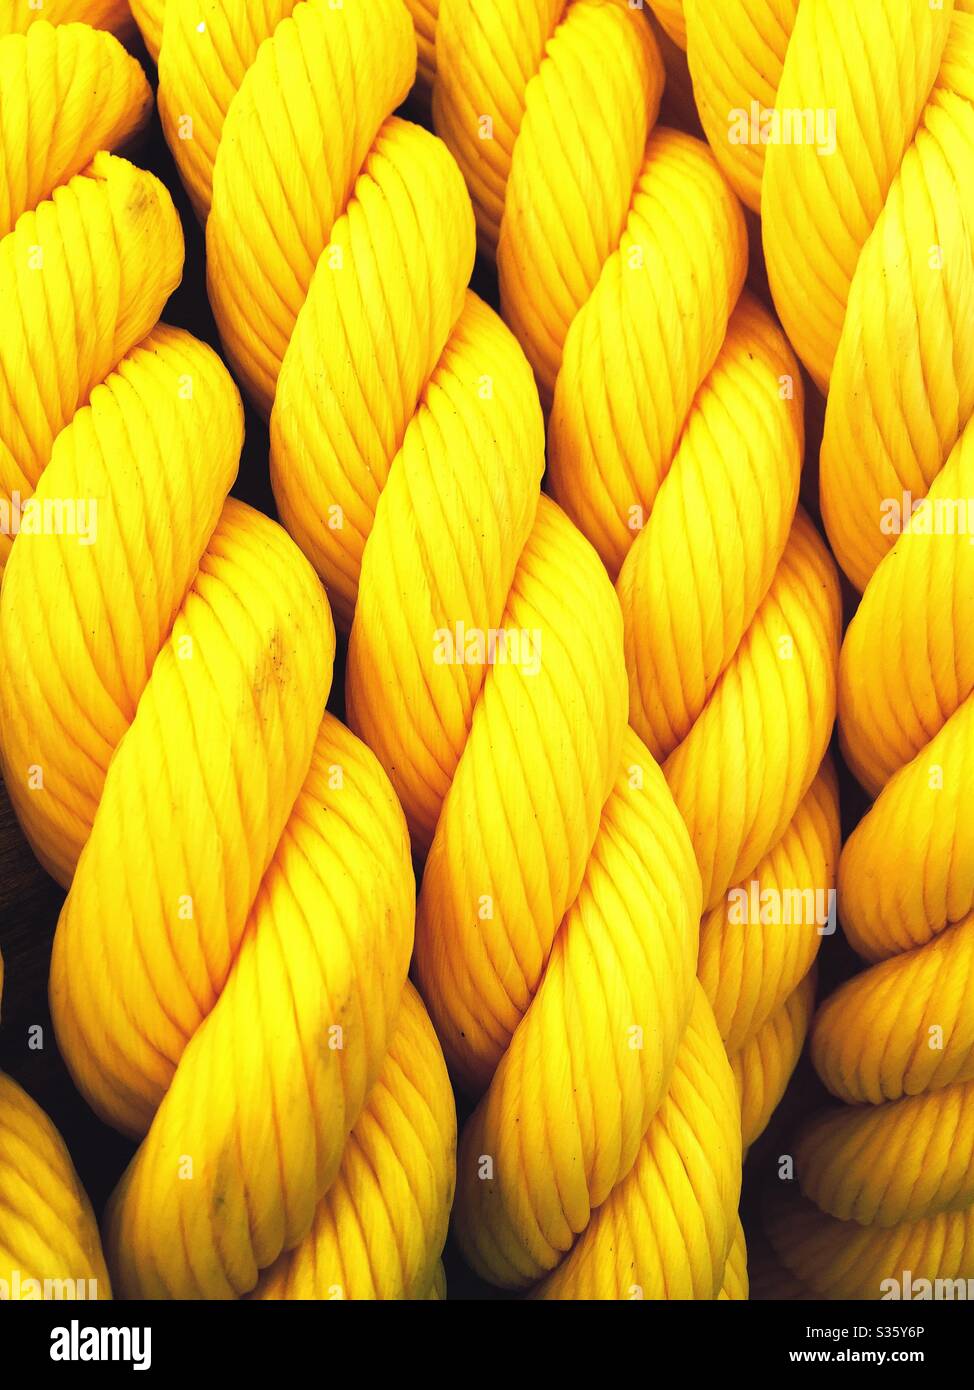 Bright yellow nylon rope. Nautical theme background. Full frame closeup detail of coiled yellow nylon rope forming patterns and shapes. Stock Photo